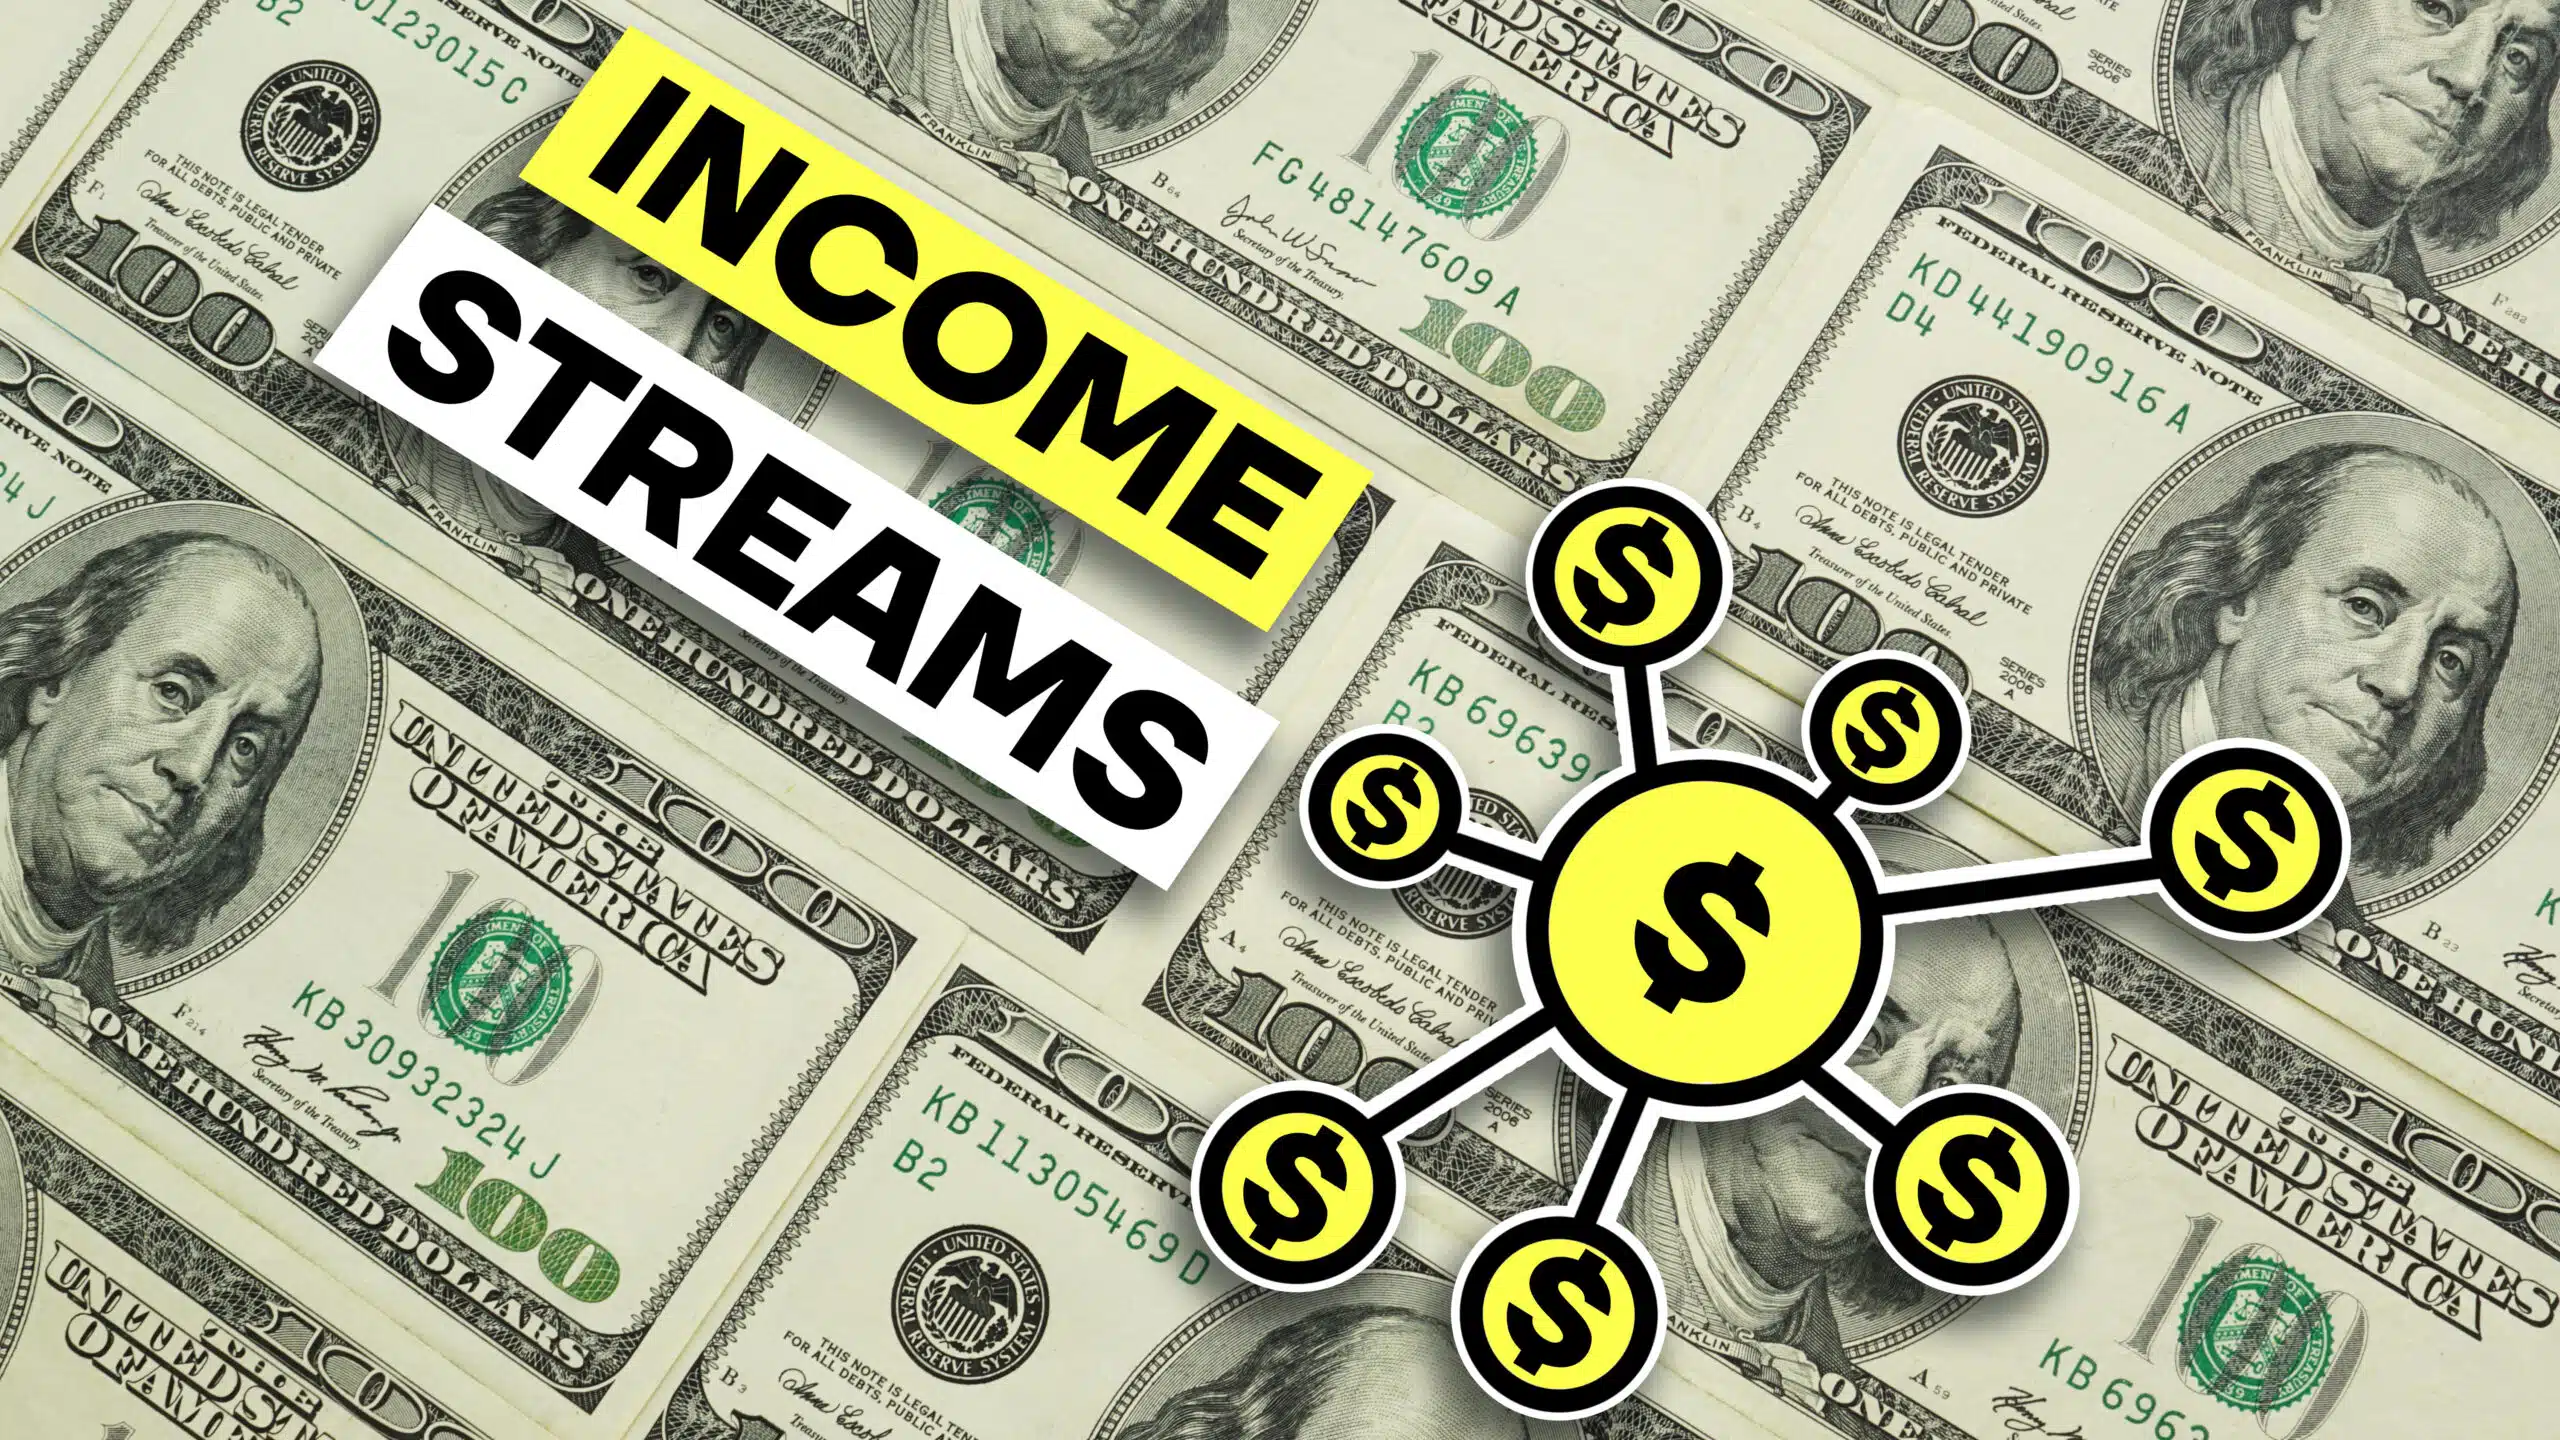 7 Income streams are shown using a text